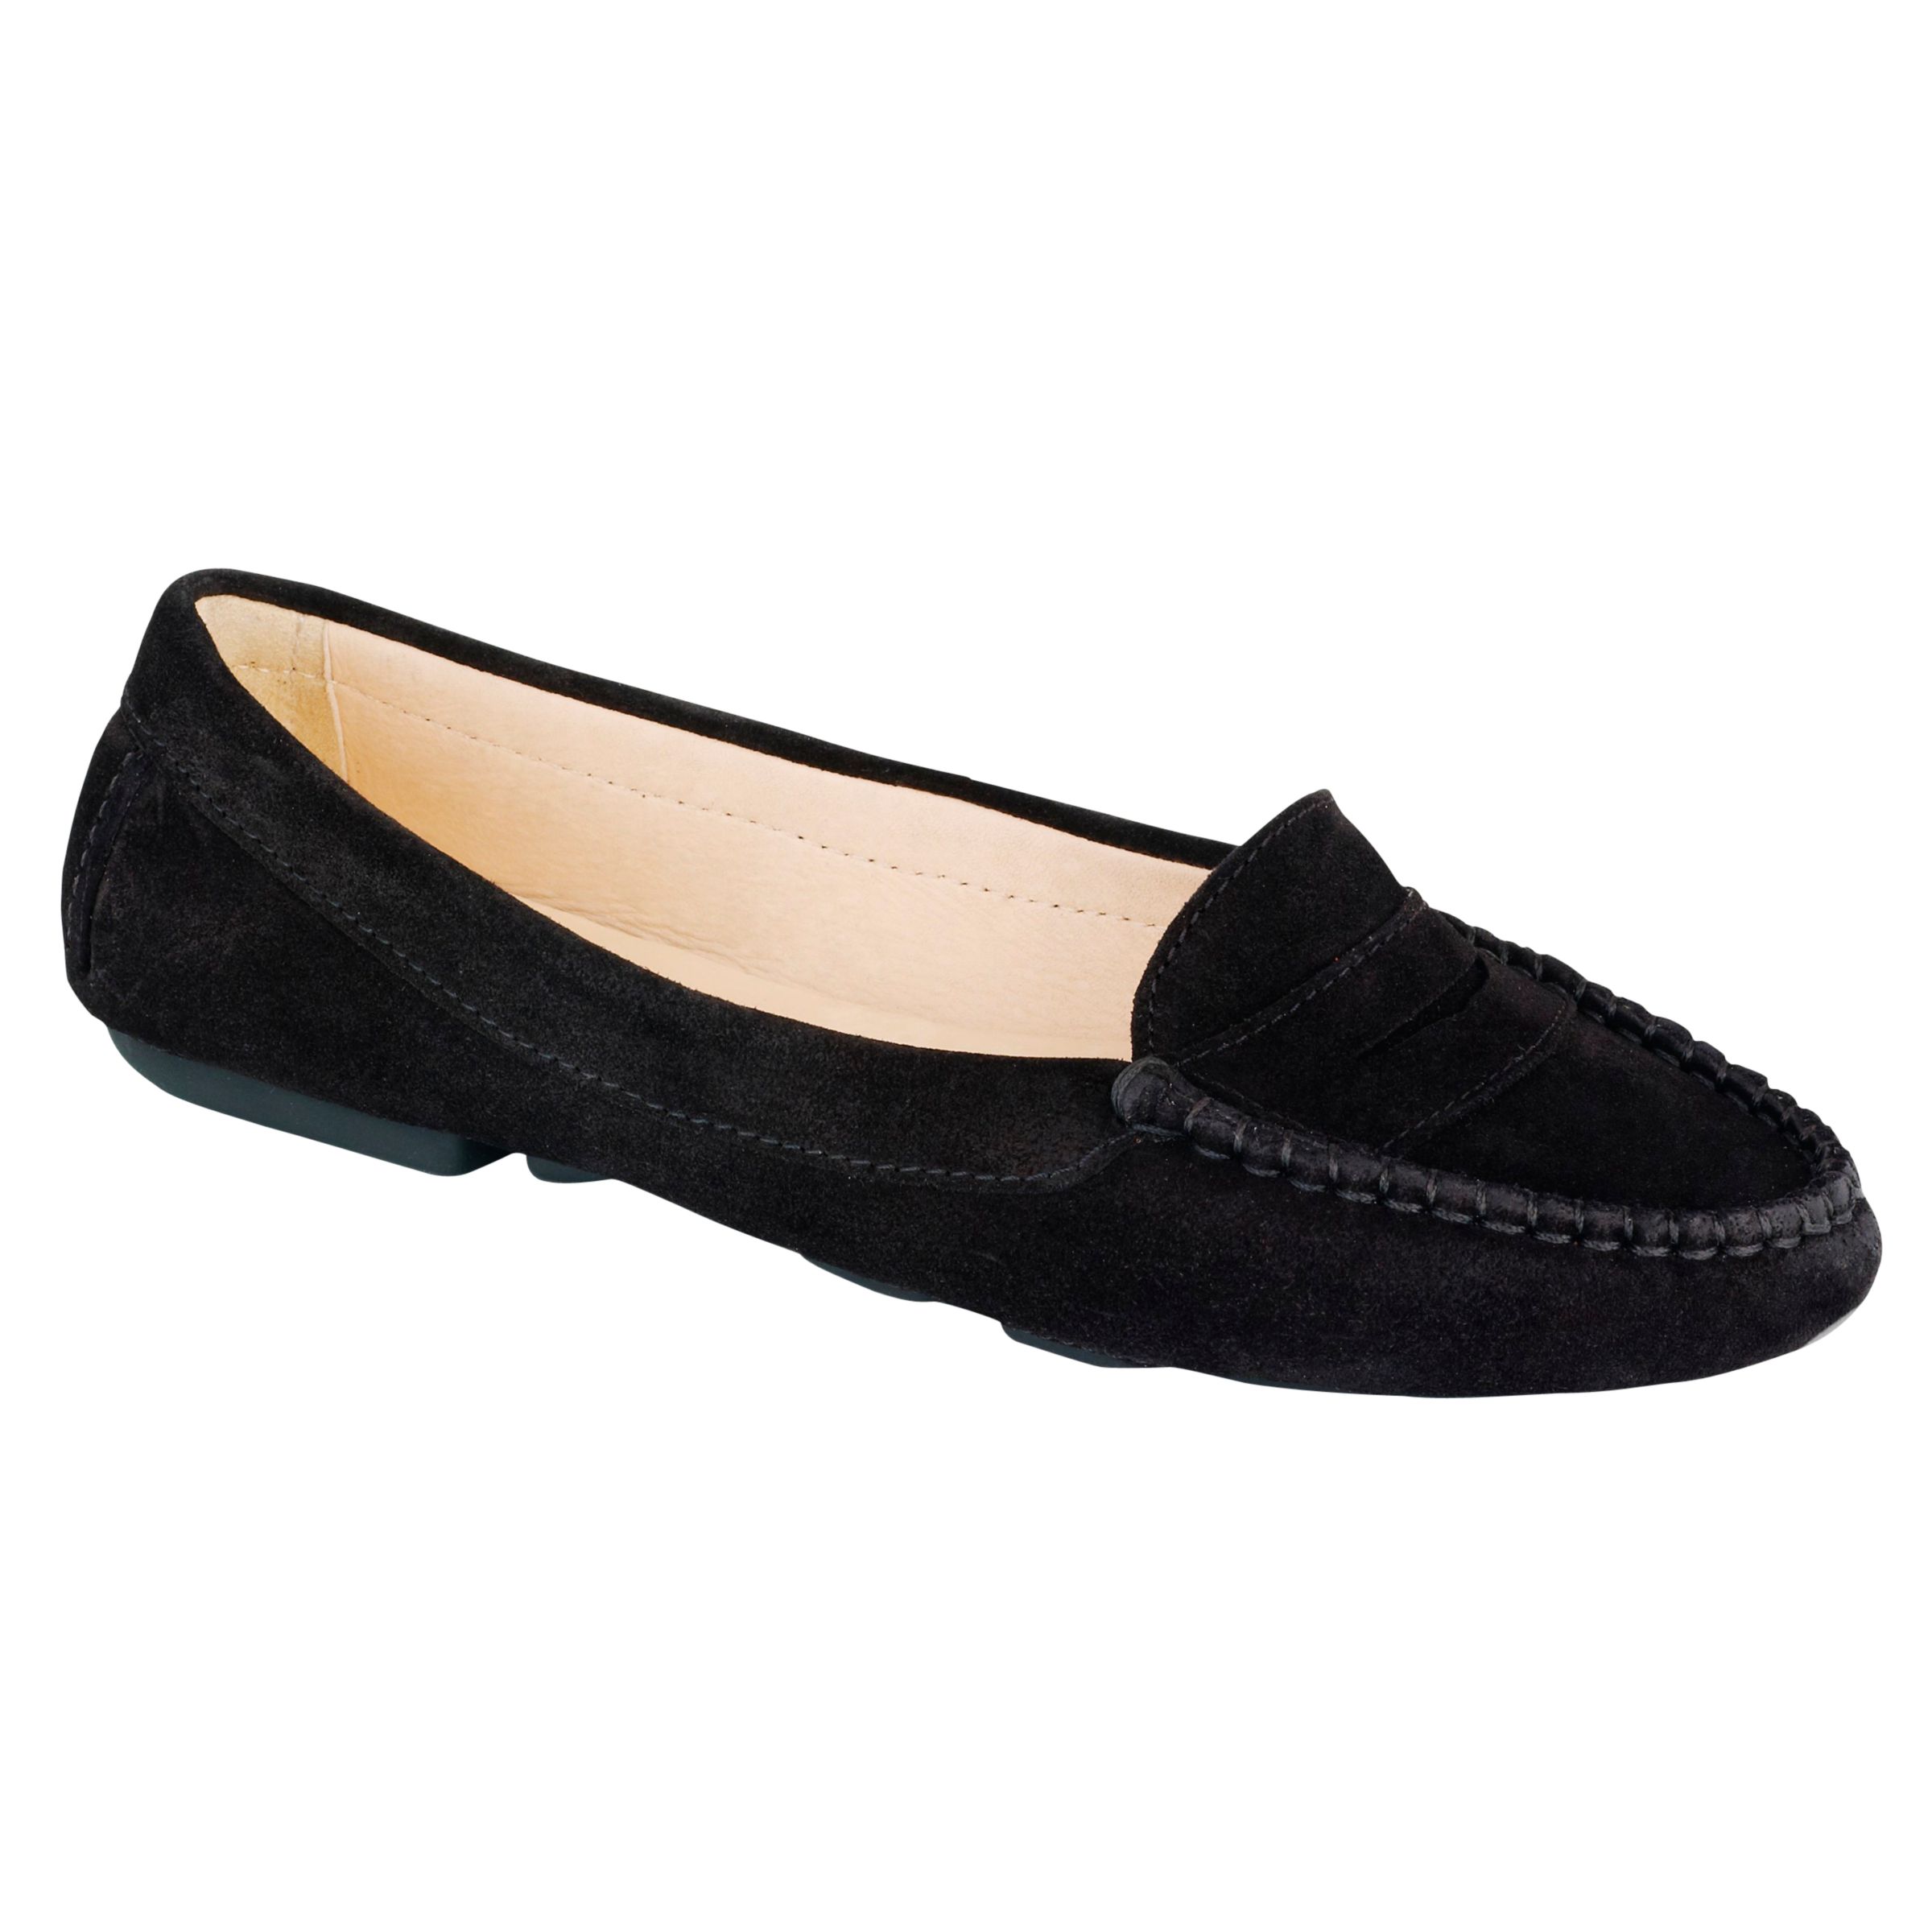 black suede loafers. Flat suede loafers from L.K.